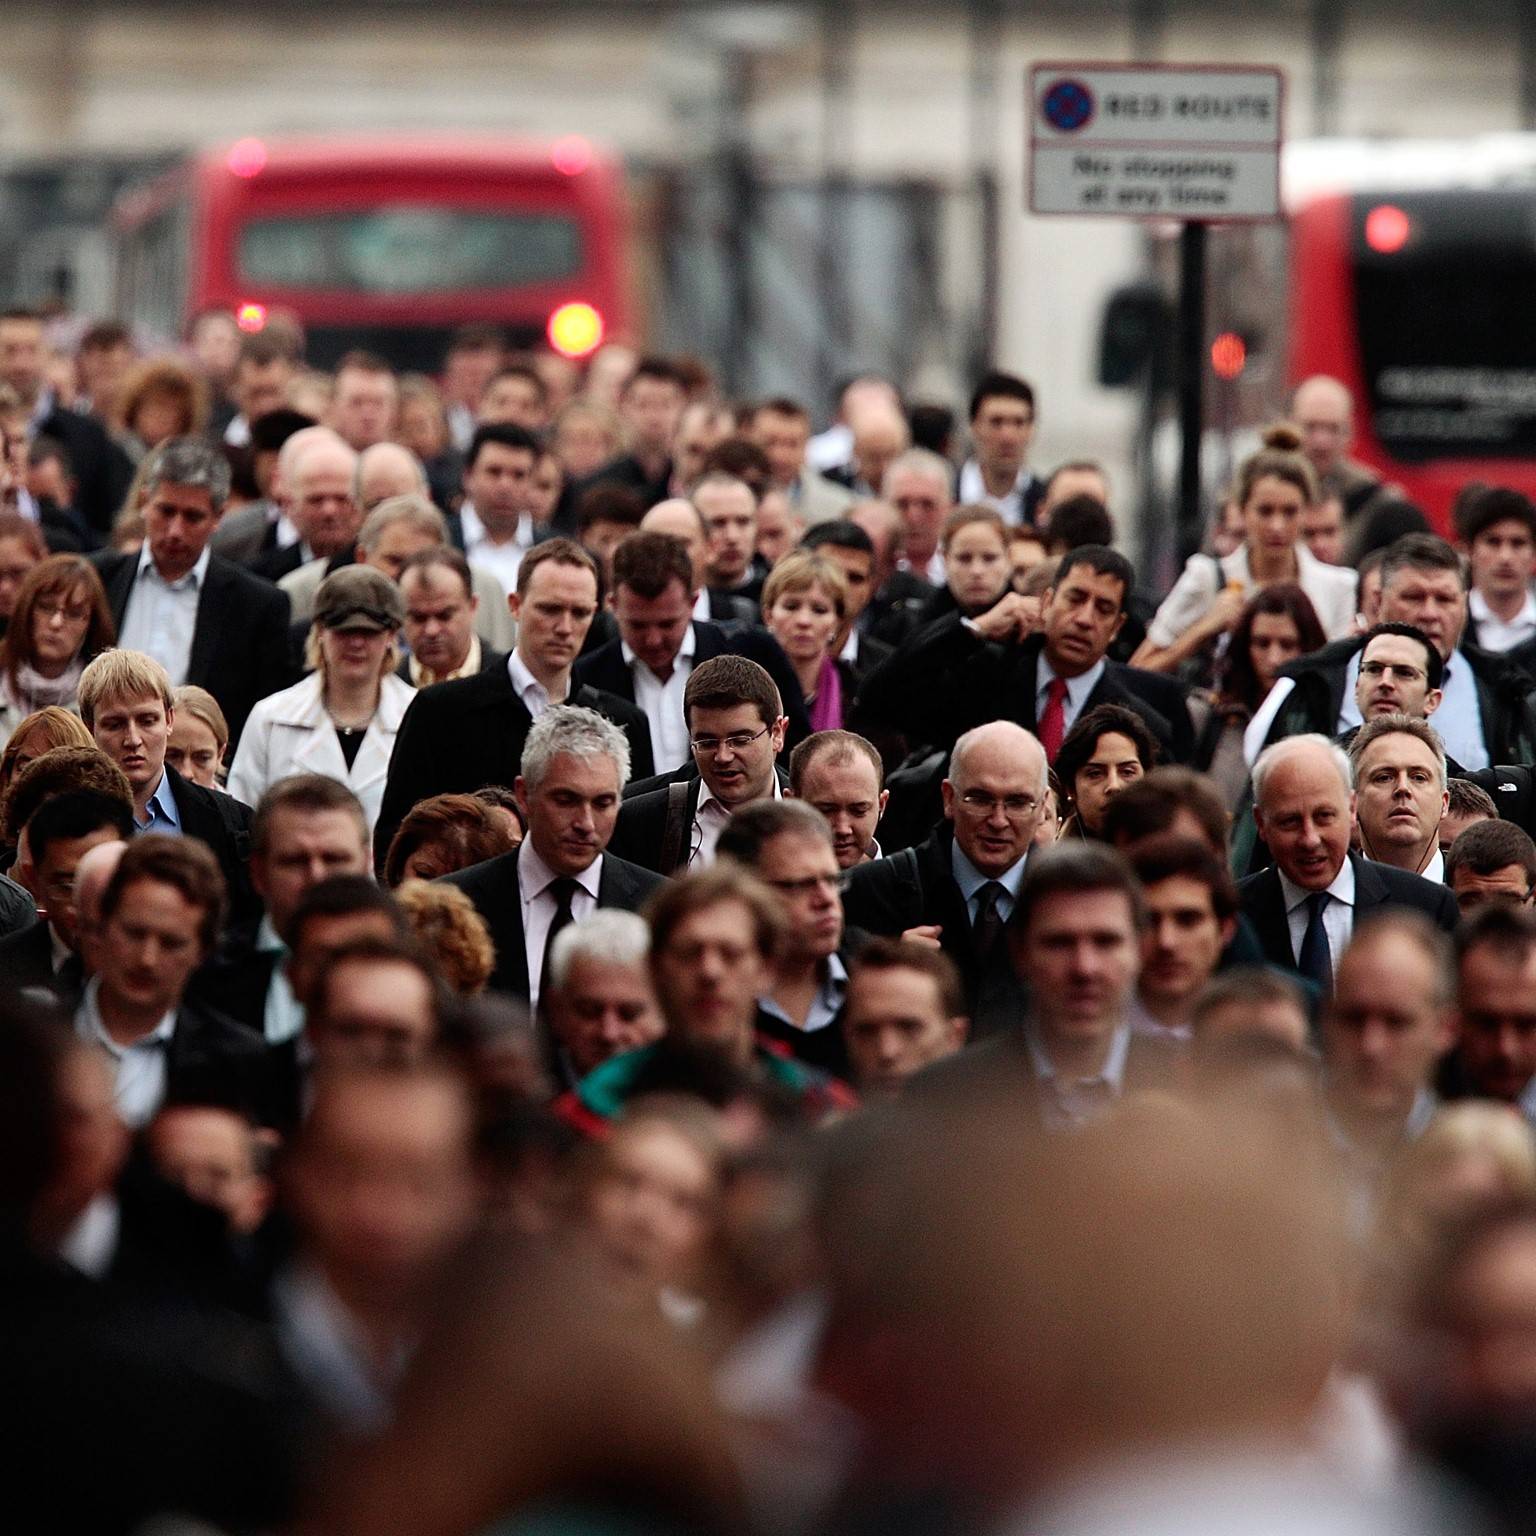 Commuting woe will drive uptake of flexible working in 2017, claims study